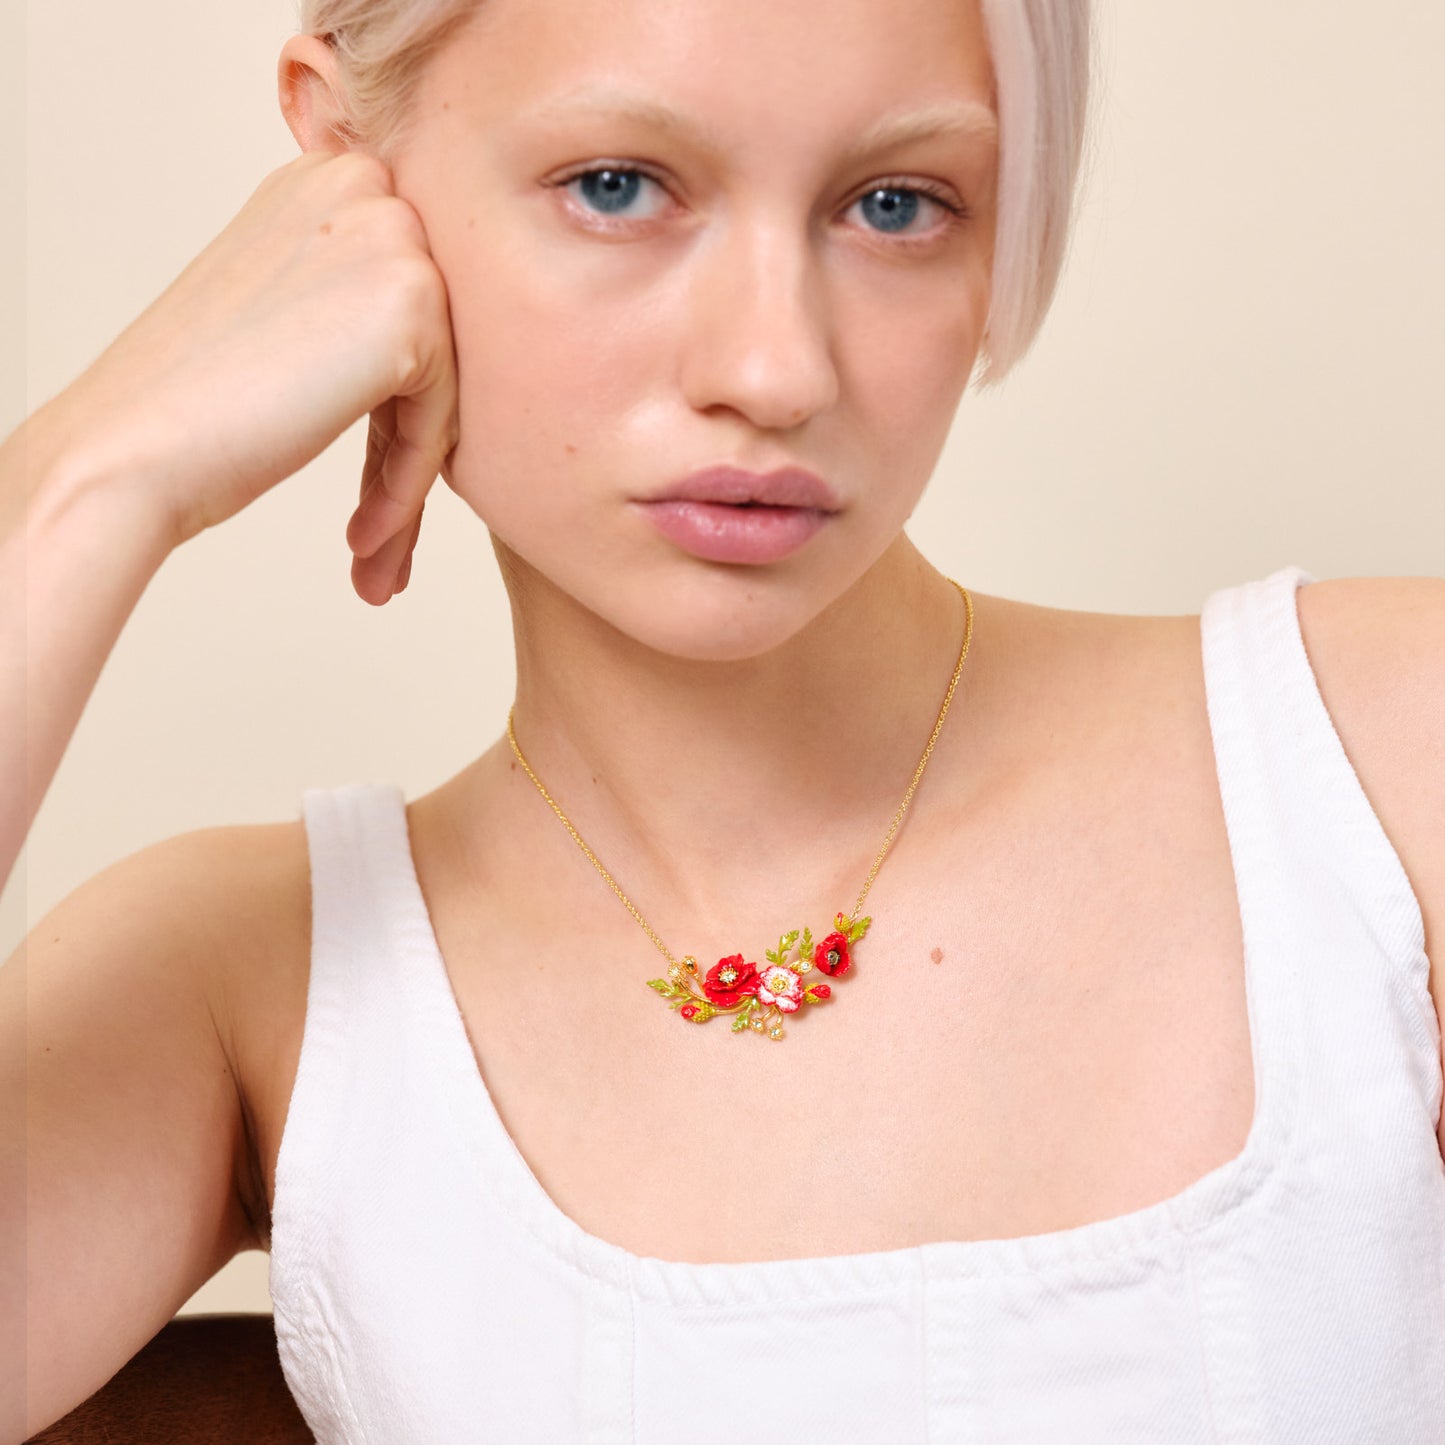 Poppy And Daisy Statement Necklace | ATPO3051